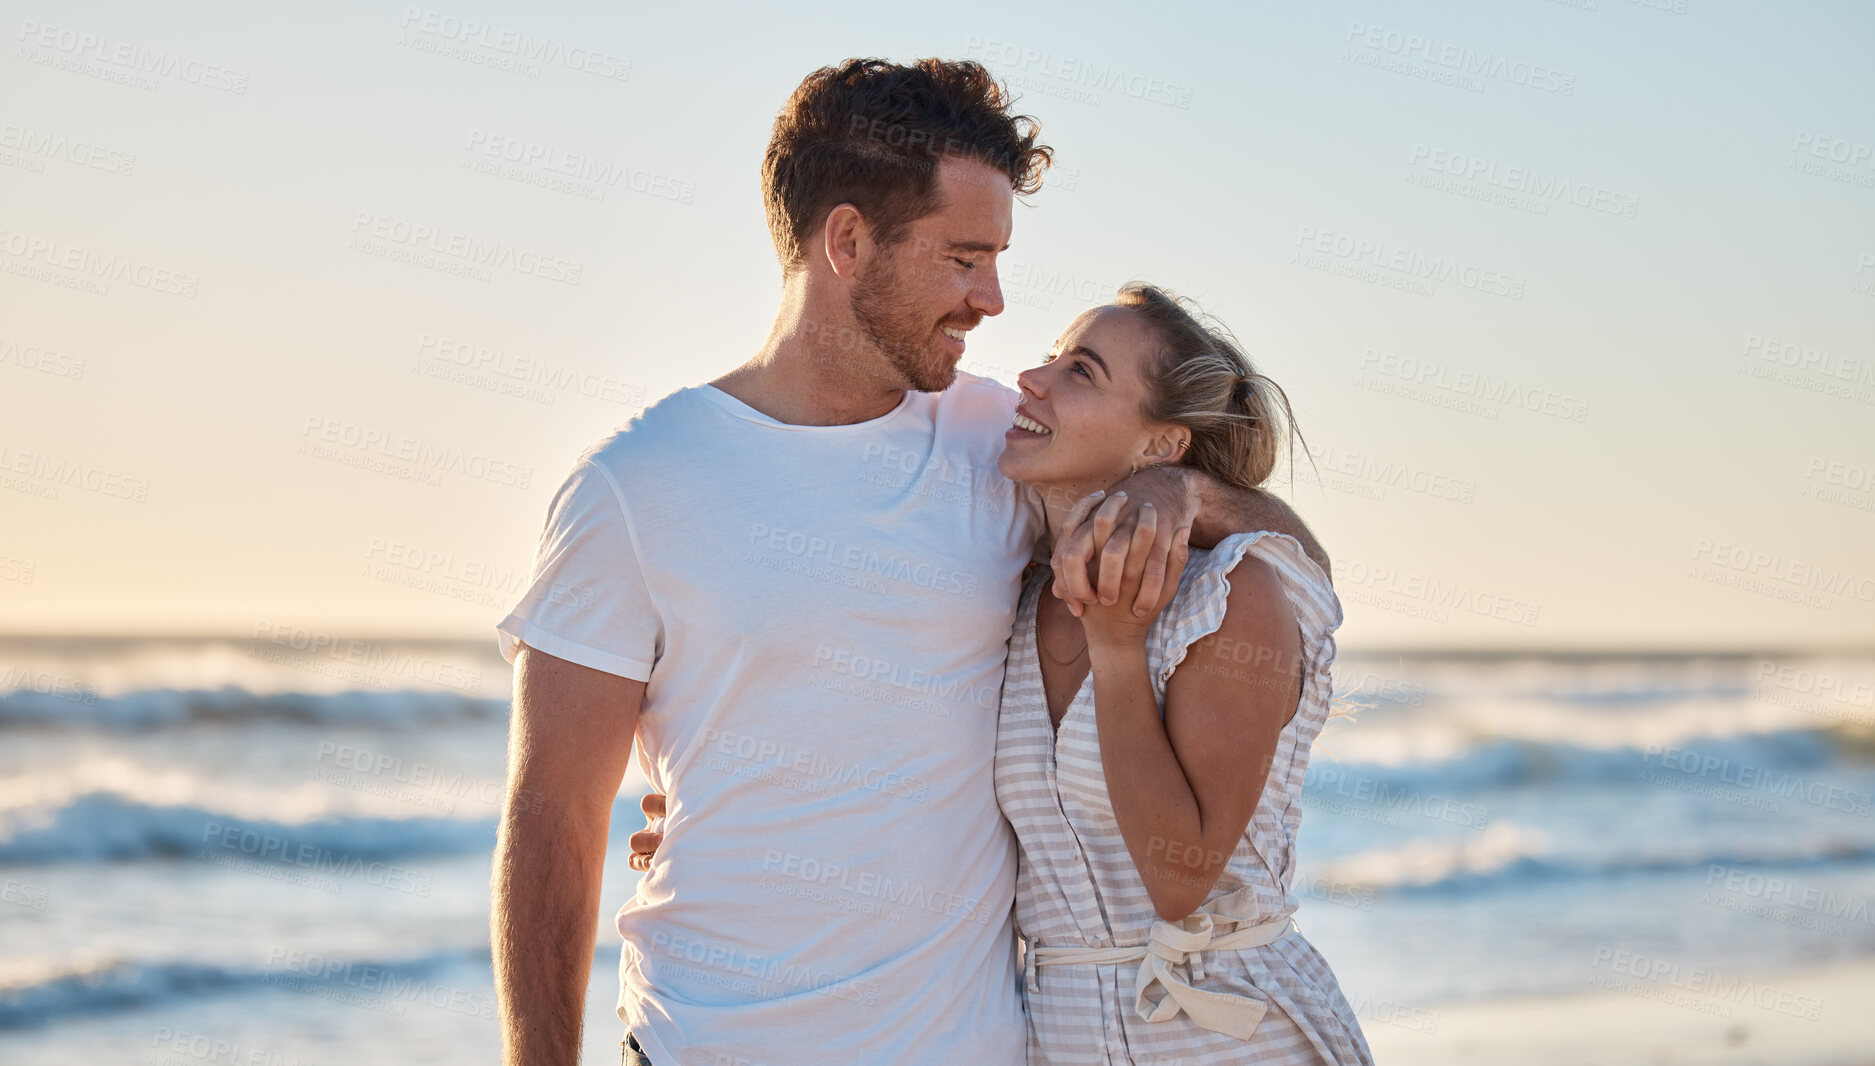 Buy stock photo Sunset beach, love and summer with a couple hug on the sand by the sea or ocean while on holiday together. Happy, smile and romance with man and woman bonding while on travel vacation or break at sea